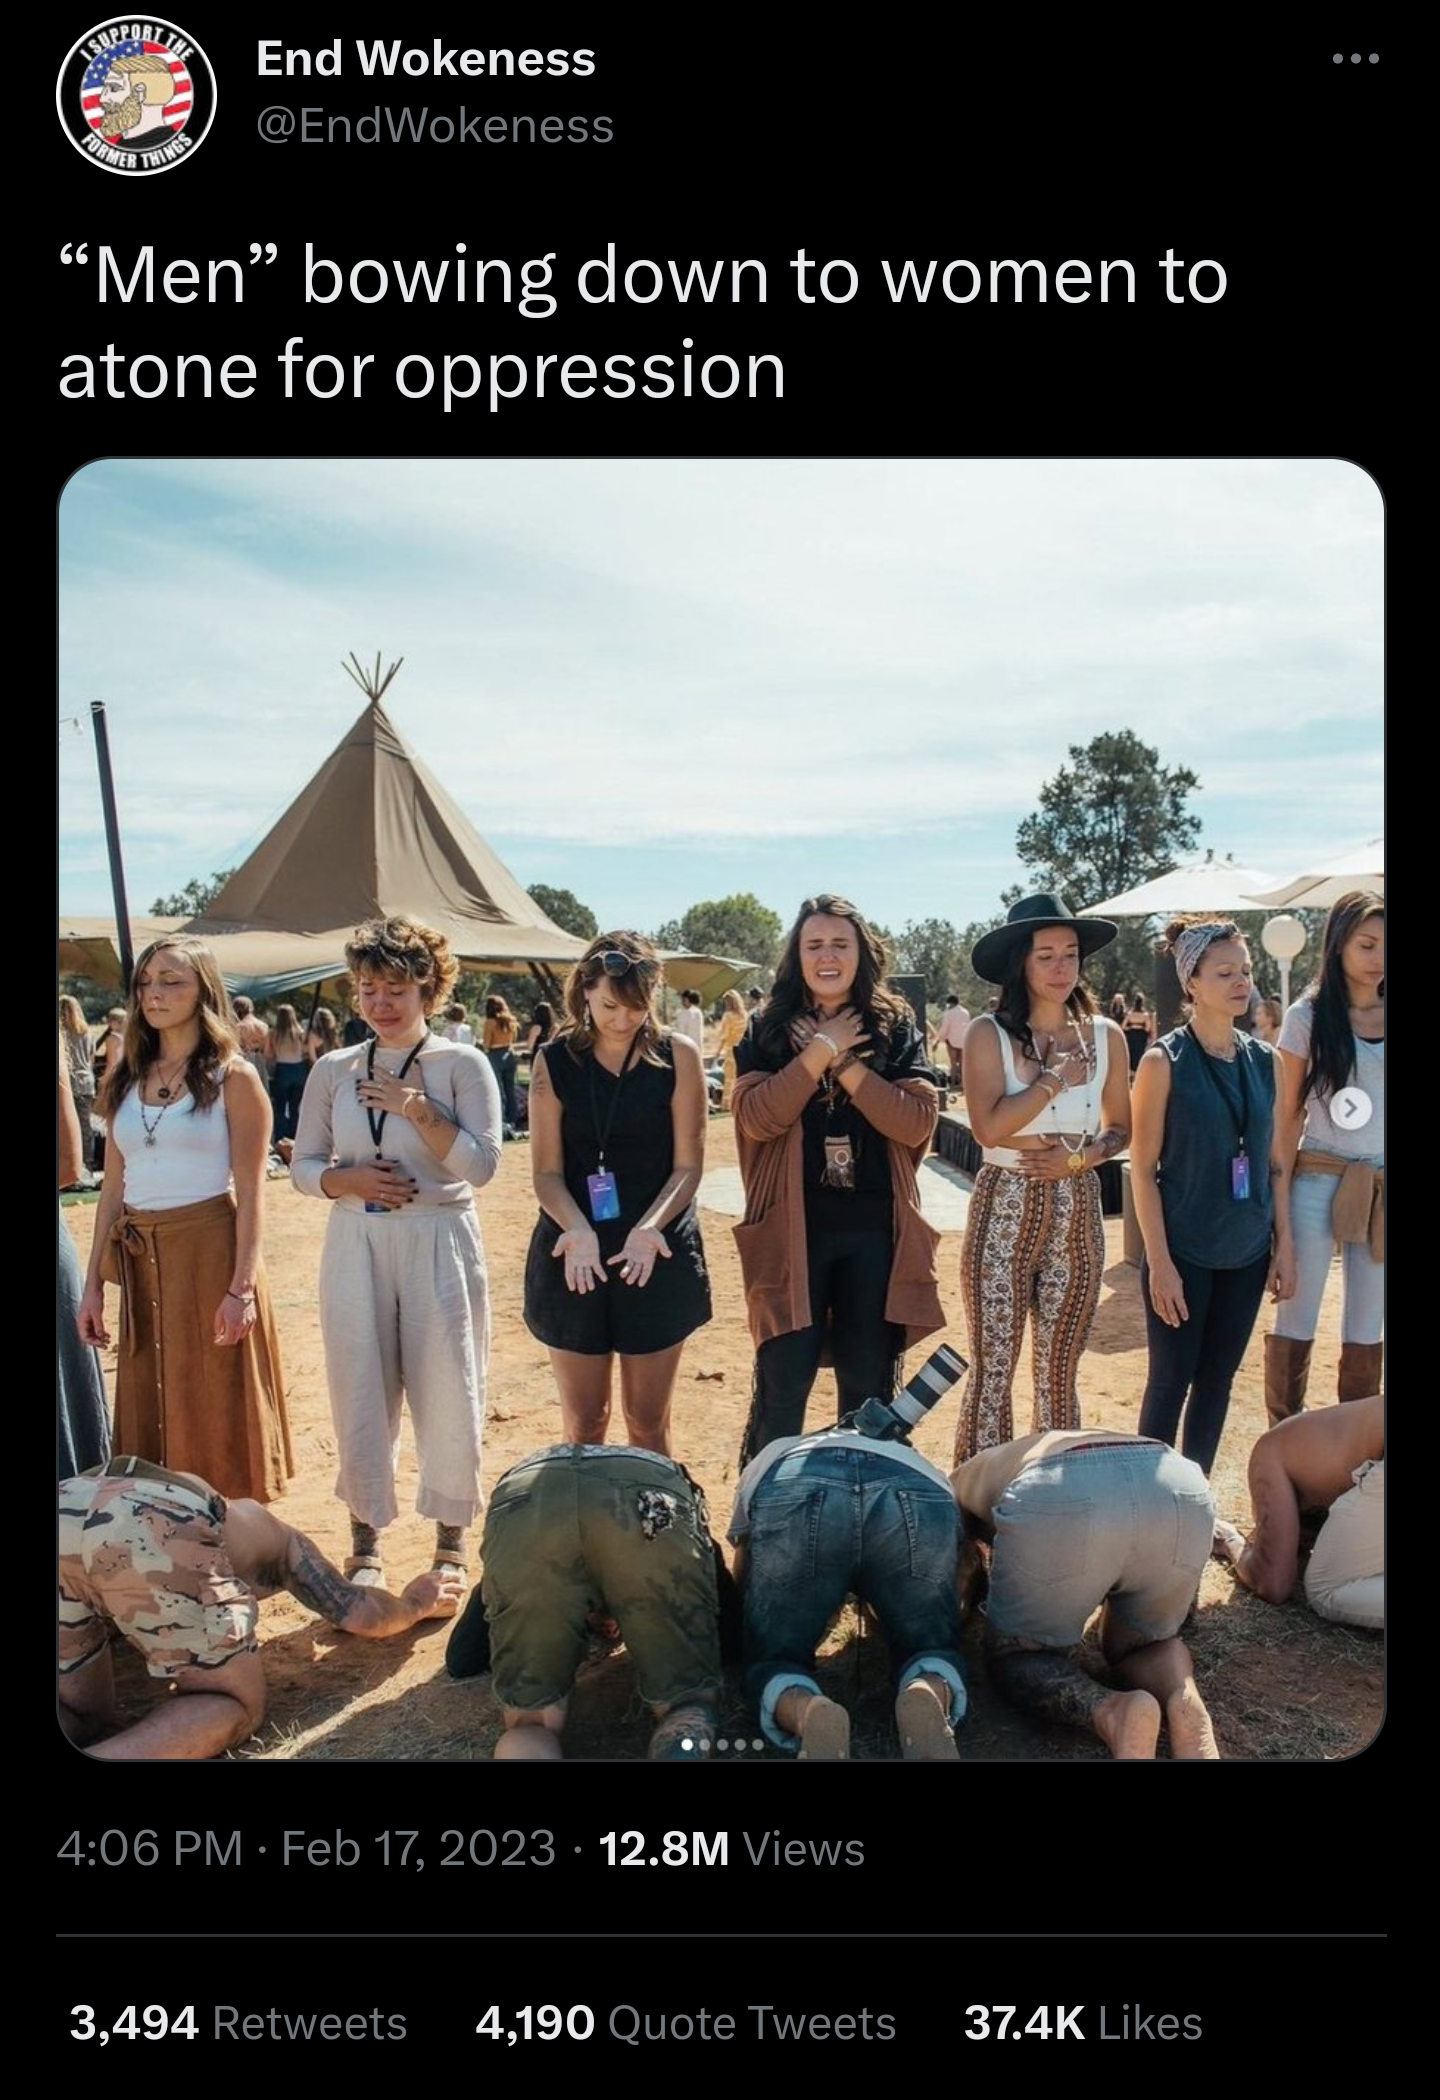 cringe pics - men bowing down to women - There Jus End Wokeness "Men" bowing down to women to atone for oppression 12.8M Views Hoding Prodica Den 3,494 4,190 Quote Tweets